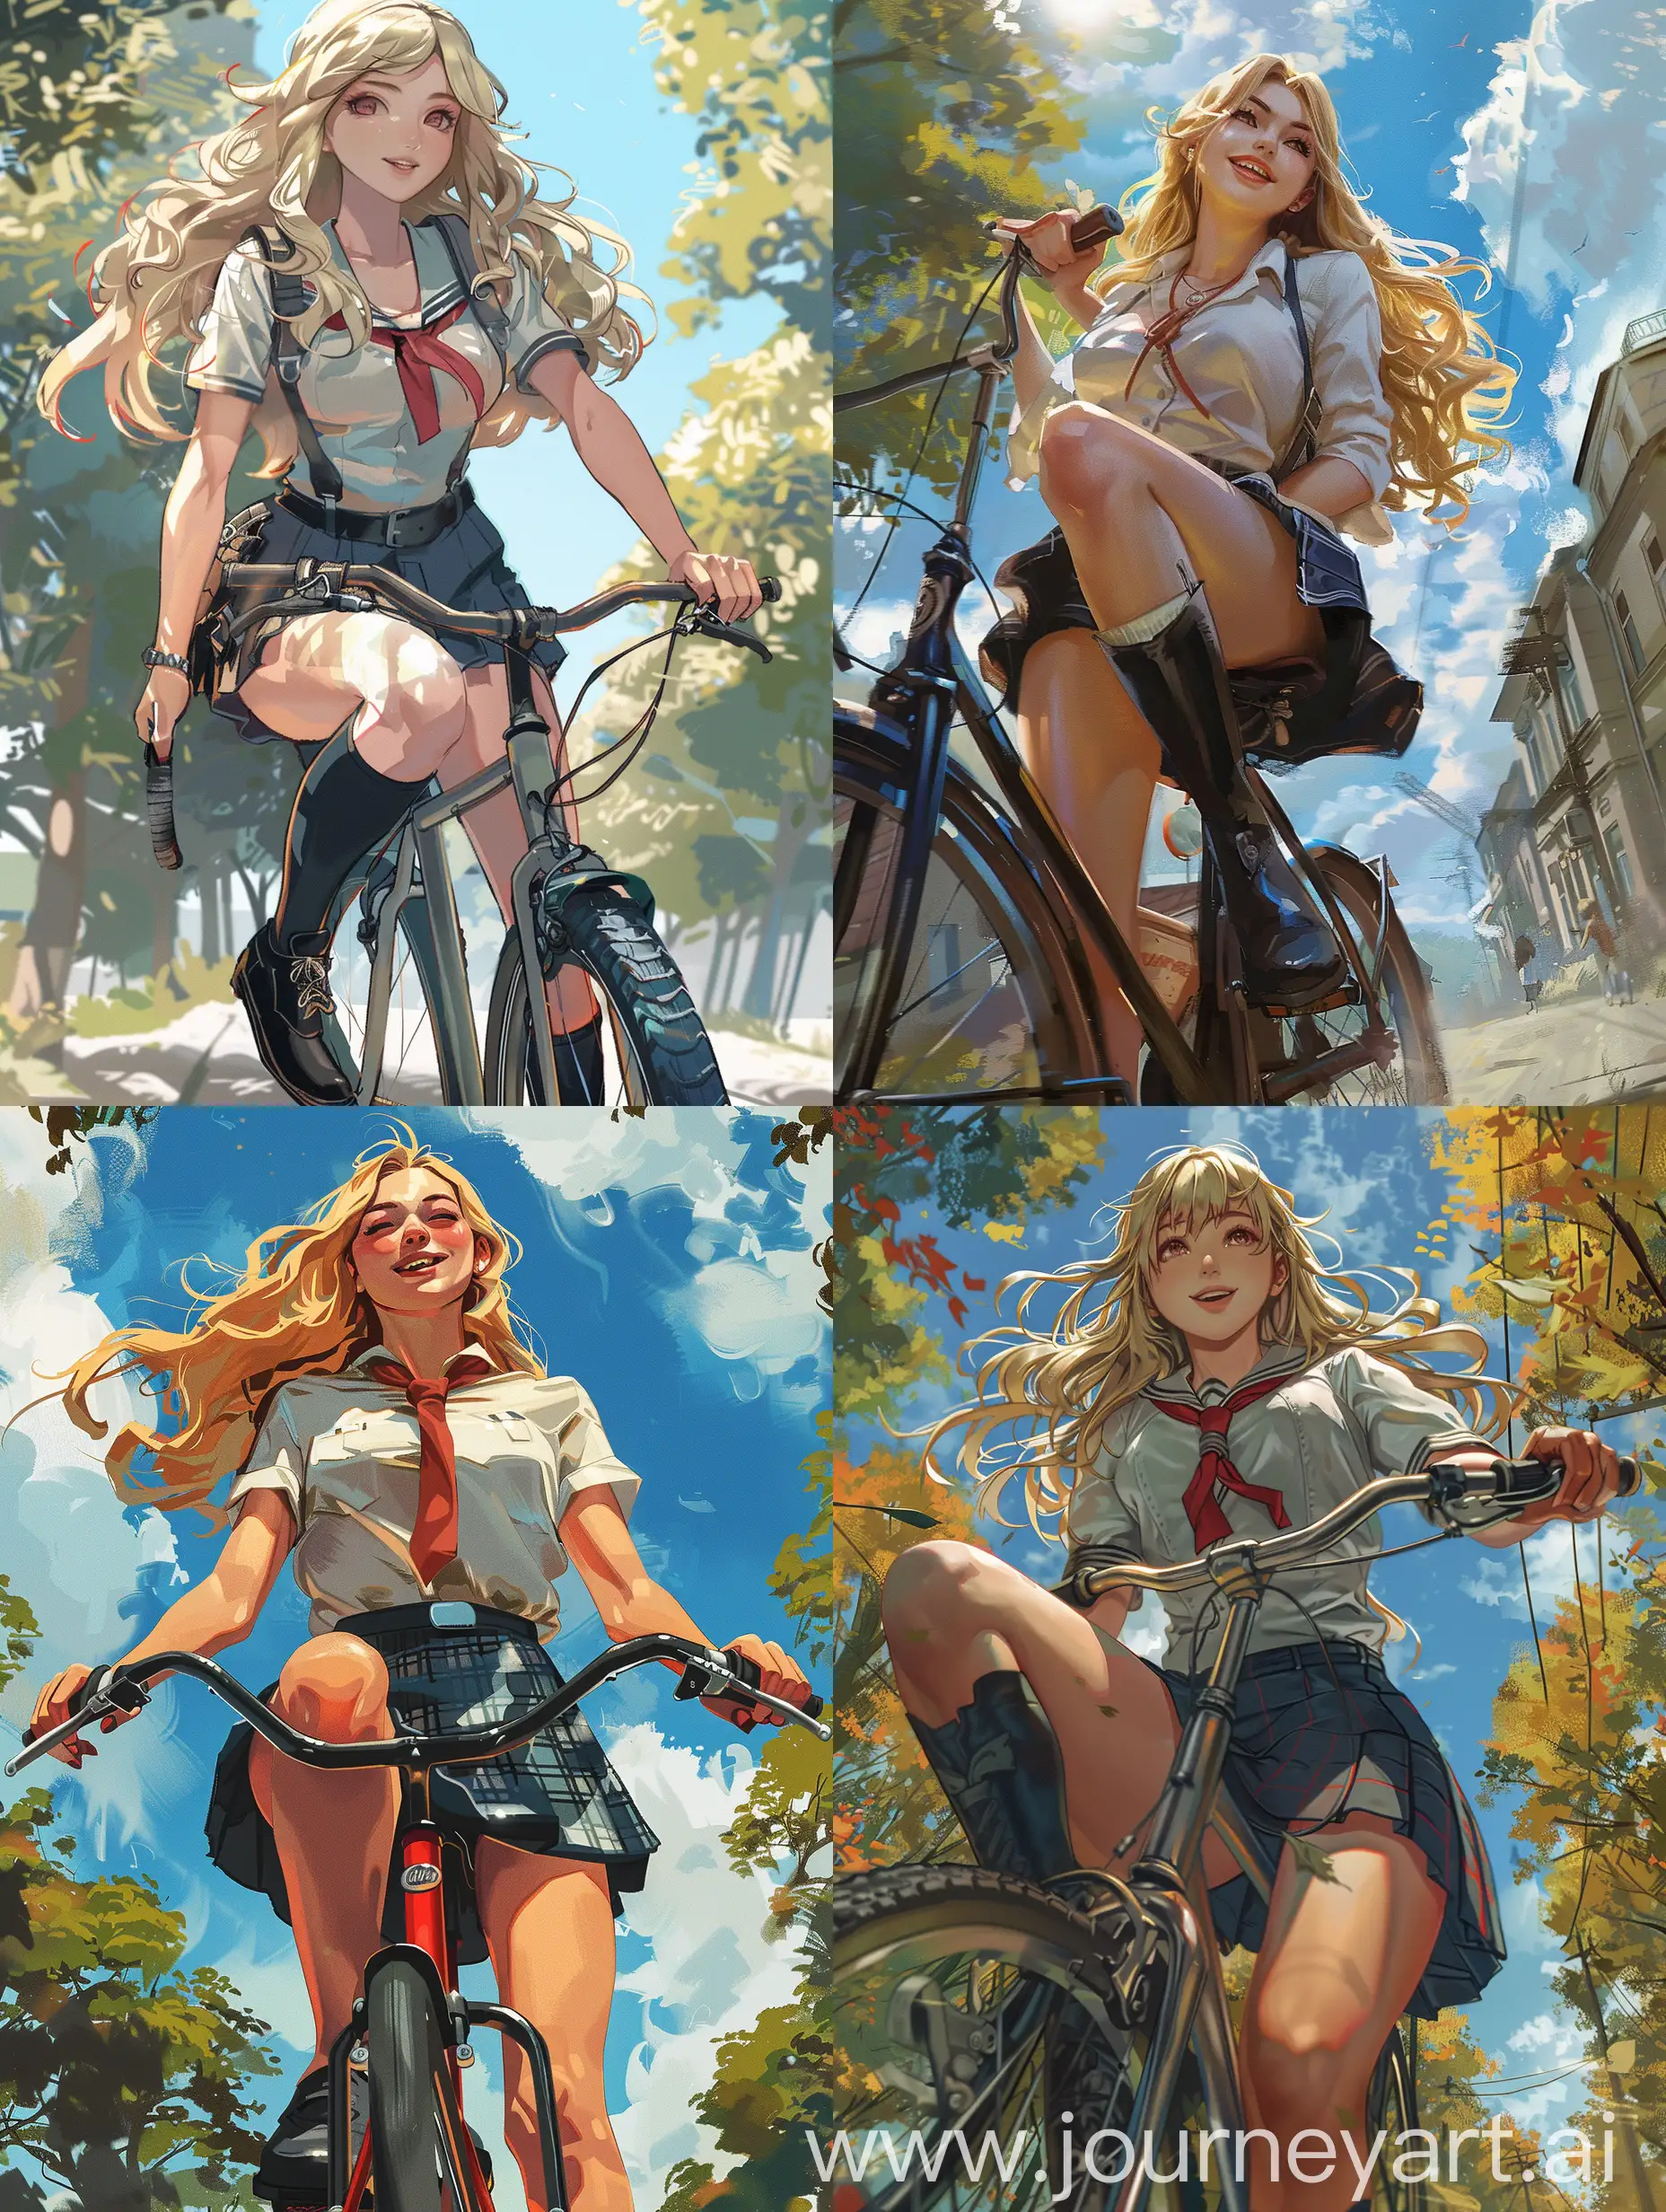 Young-Ukrainian-Woman-Riding-Bicycle-in-School-Uniform-on-Sunny-Day